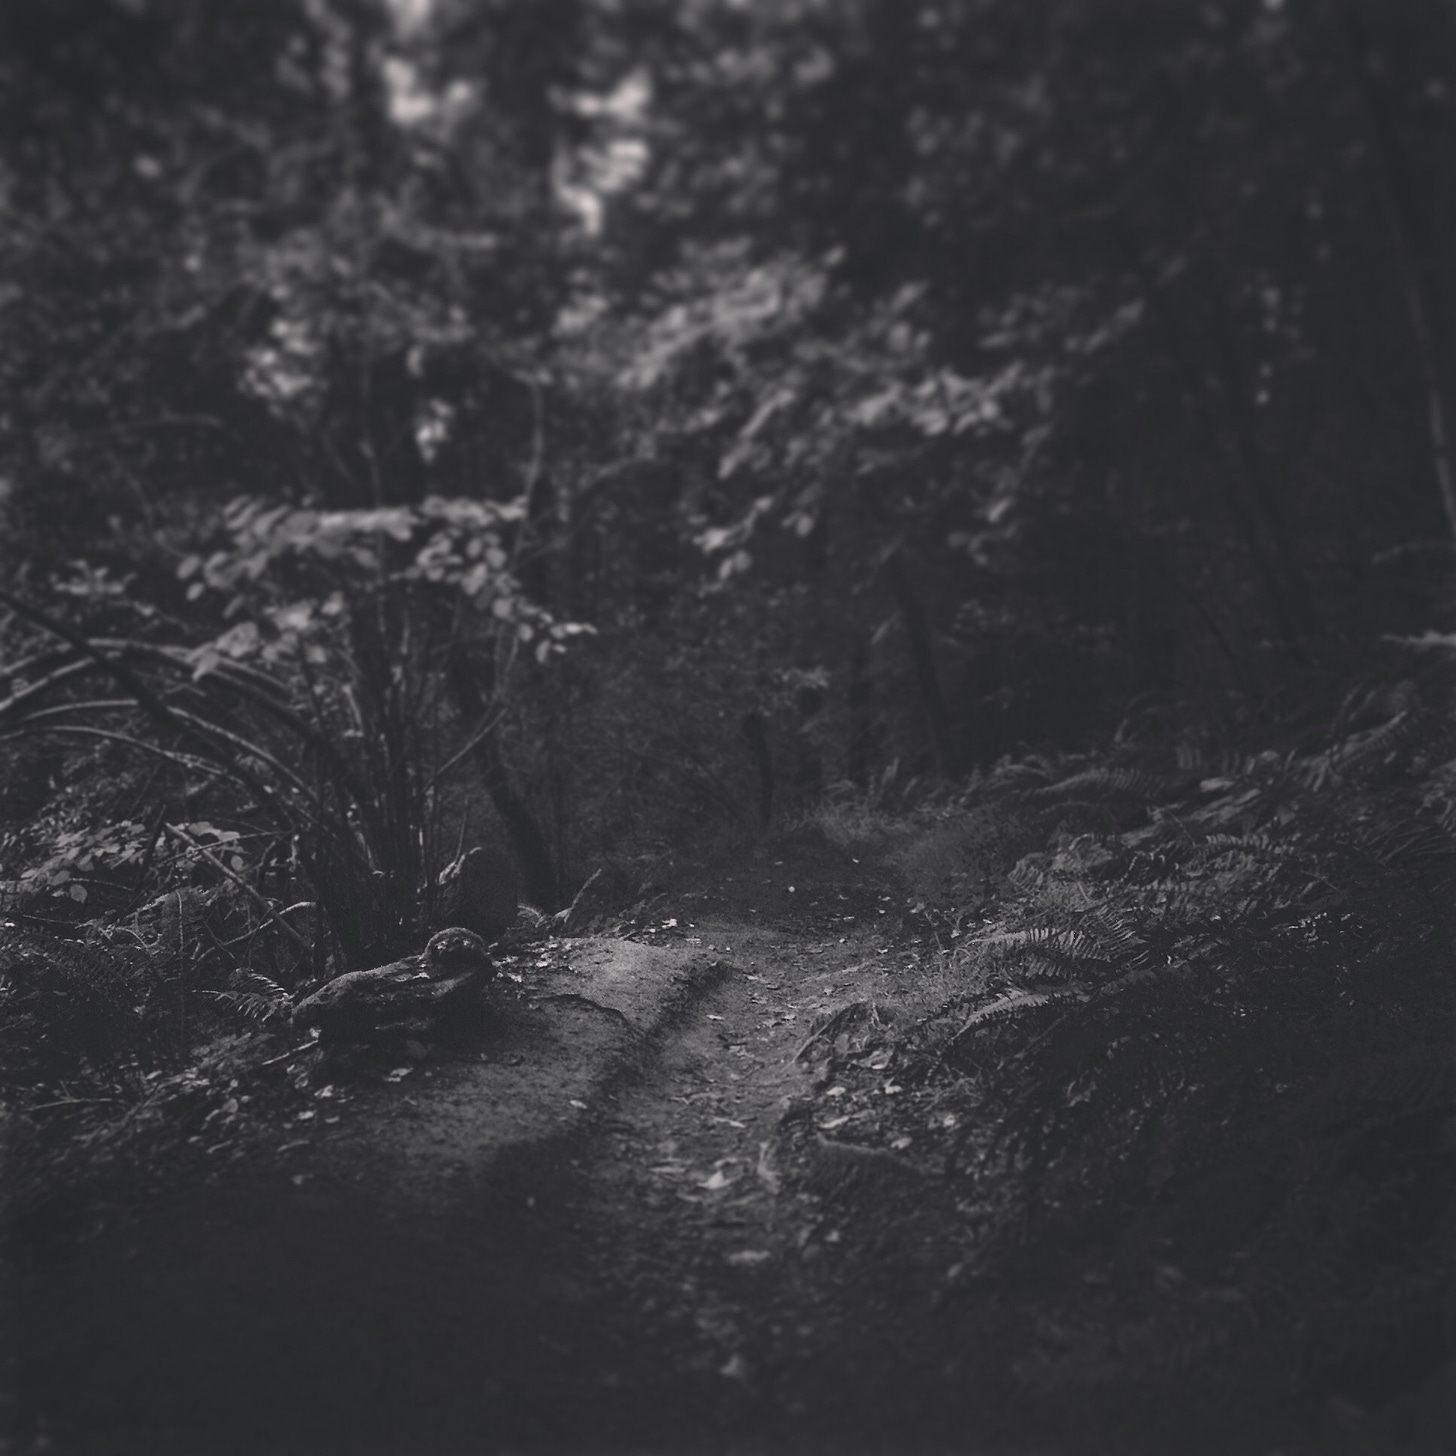 A black and white photograph where subtle light falls on the trail. The depth of field is shallow focus on the specks of light falling on the plants along the trail.